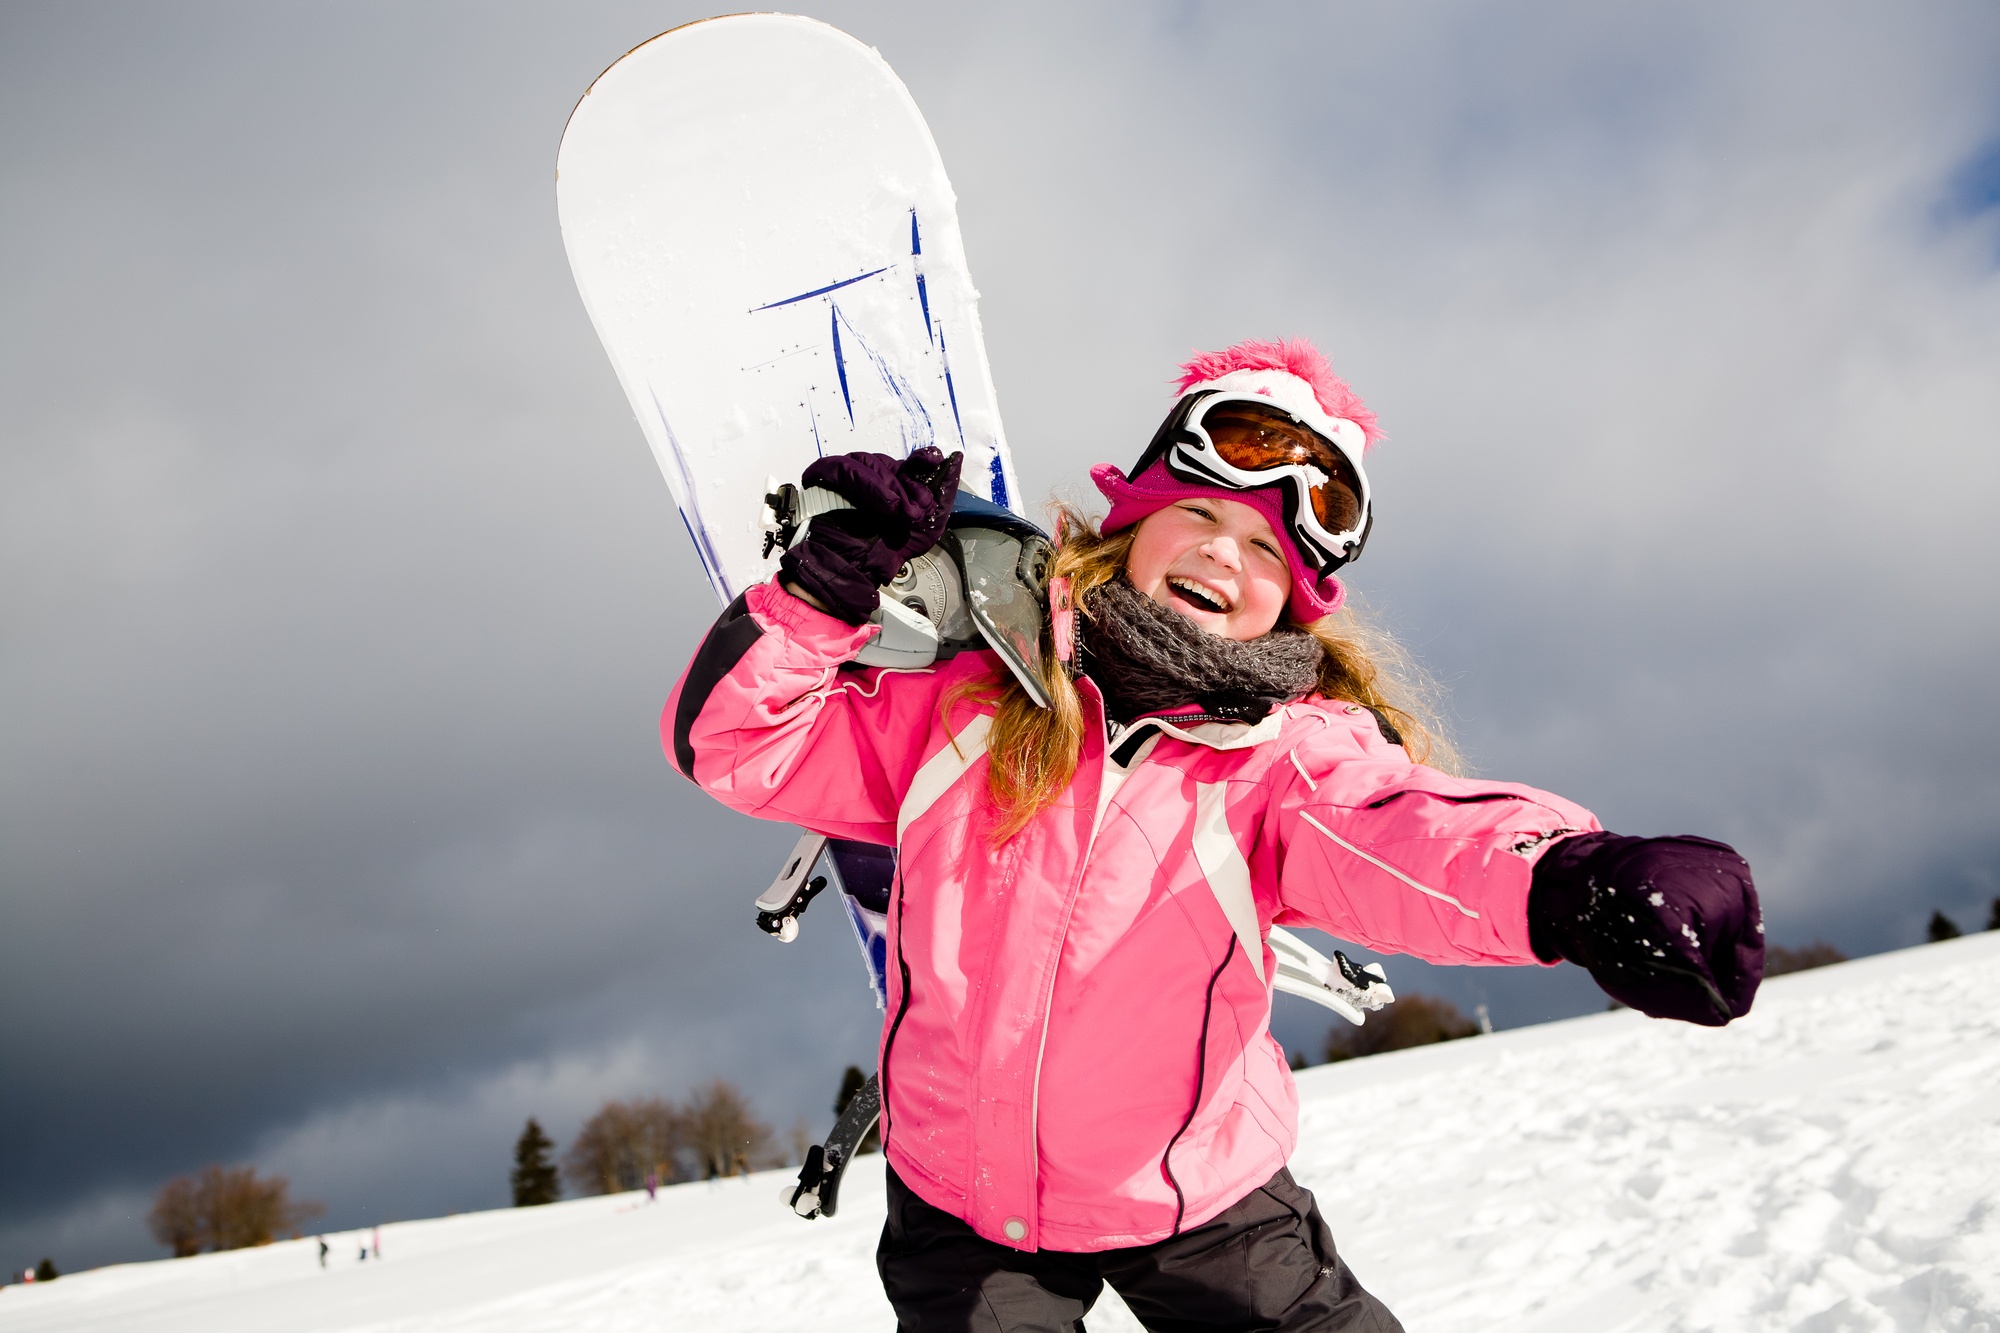 Snowboarding is a good choice for kids aged 6+